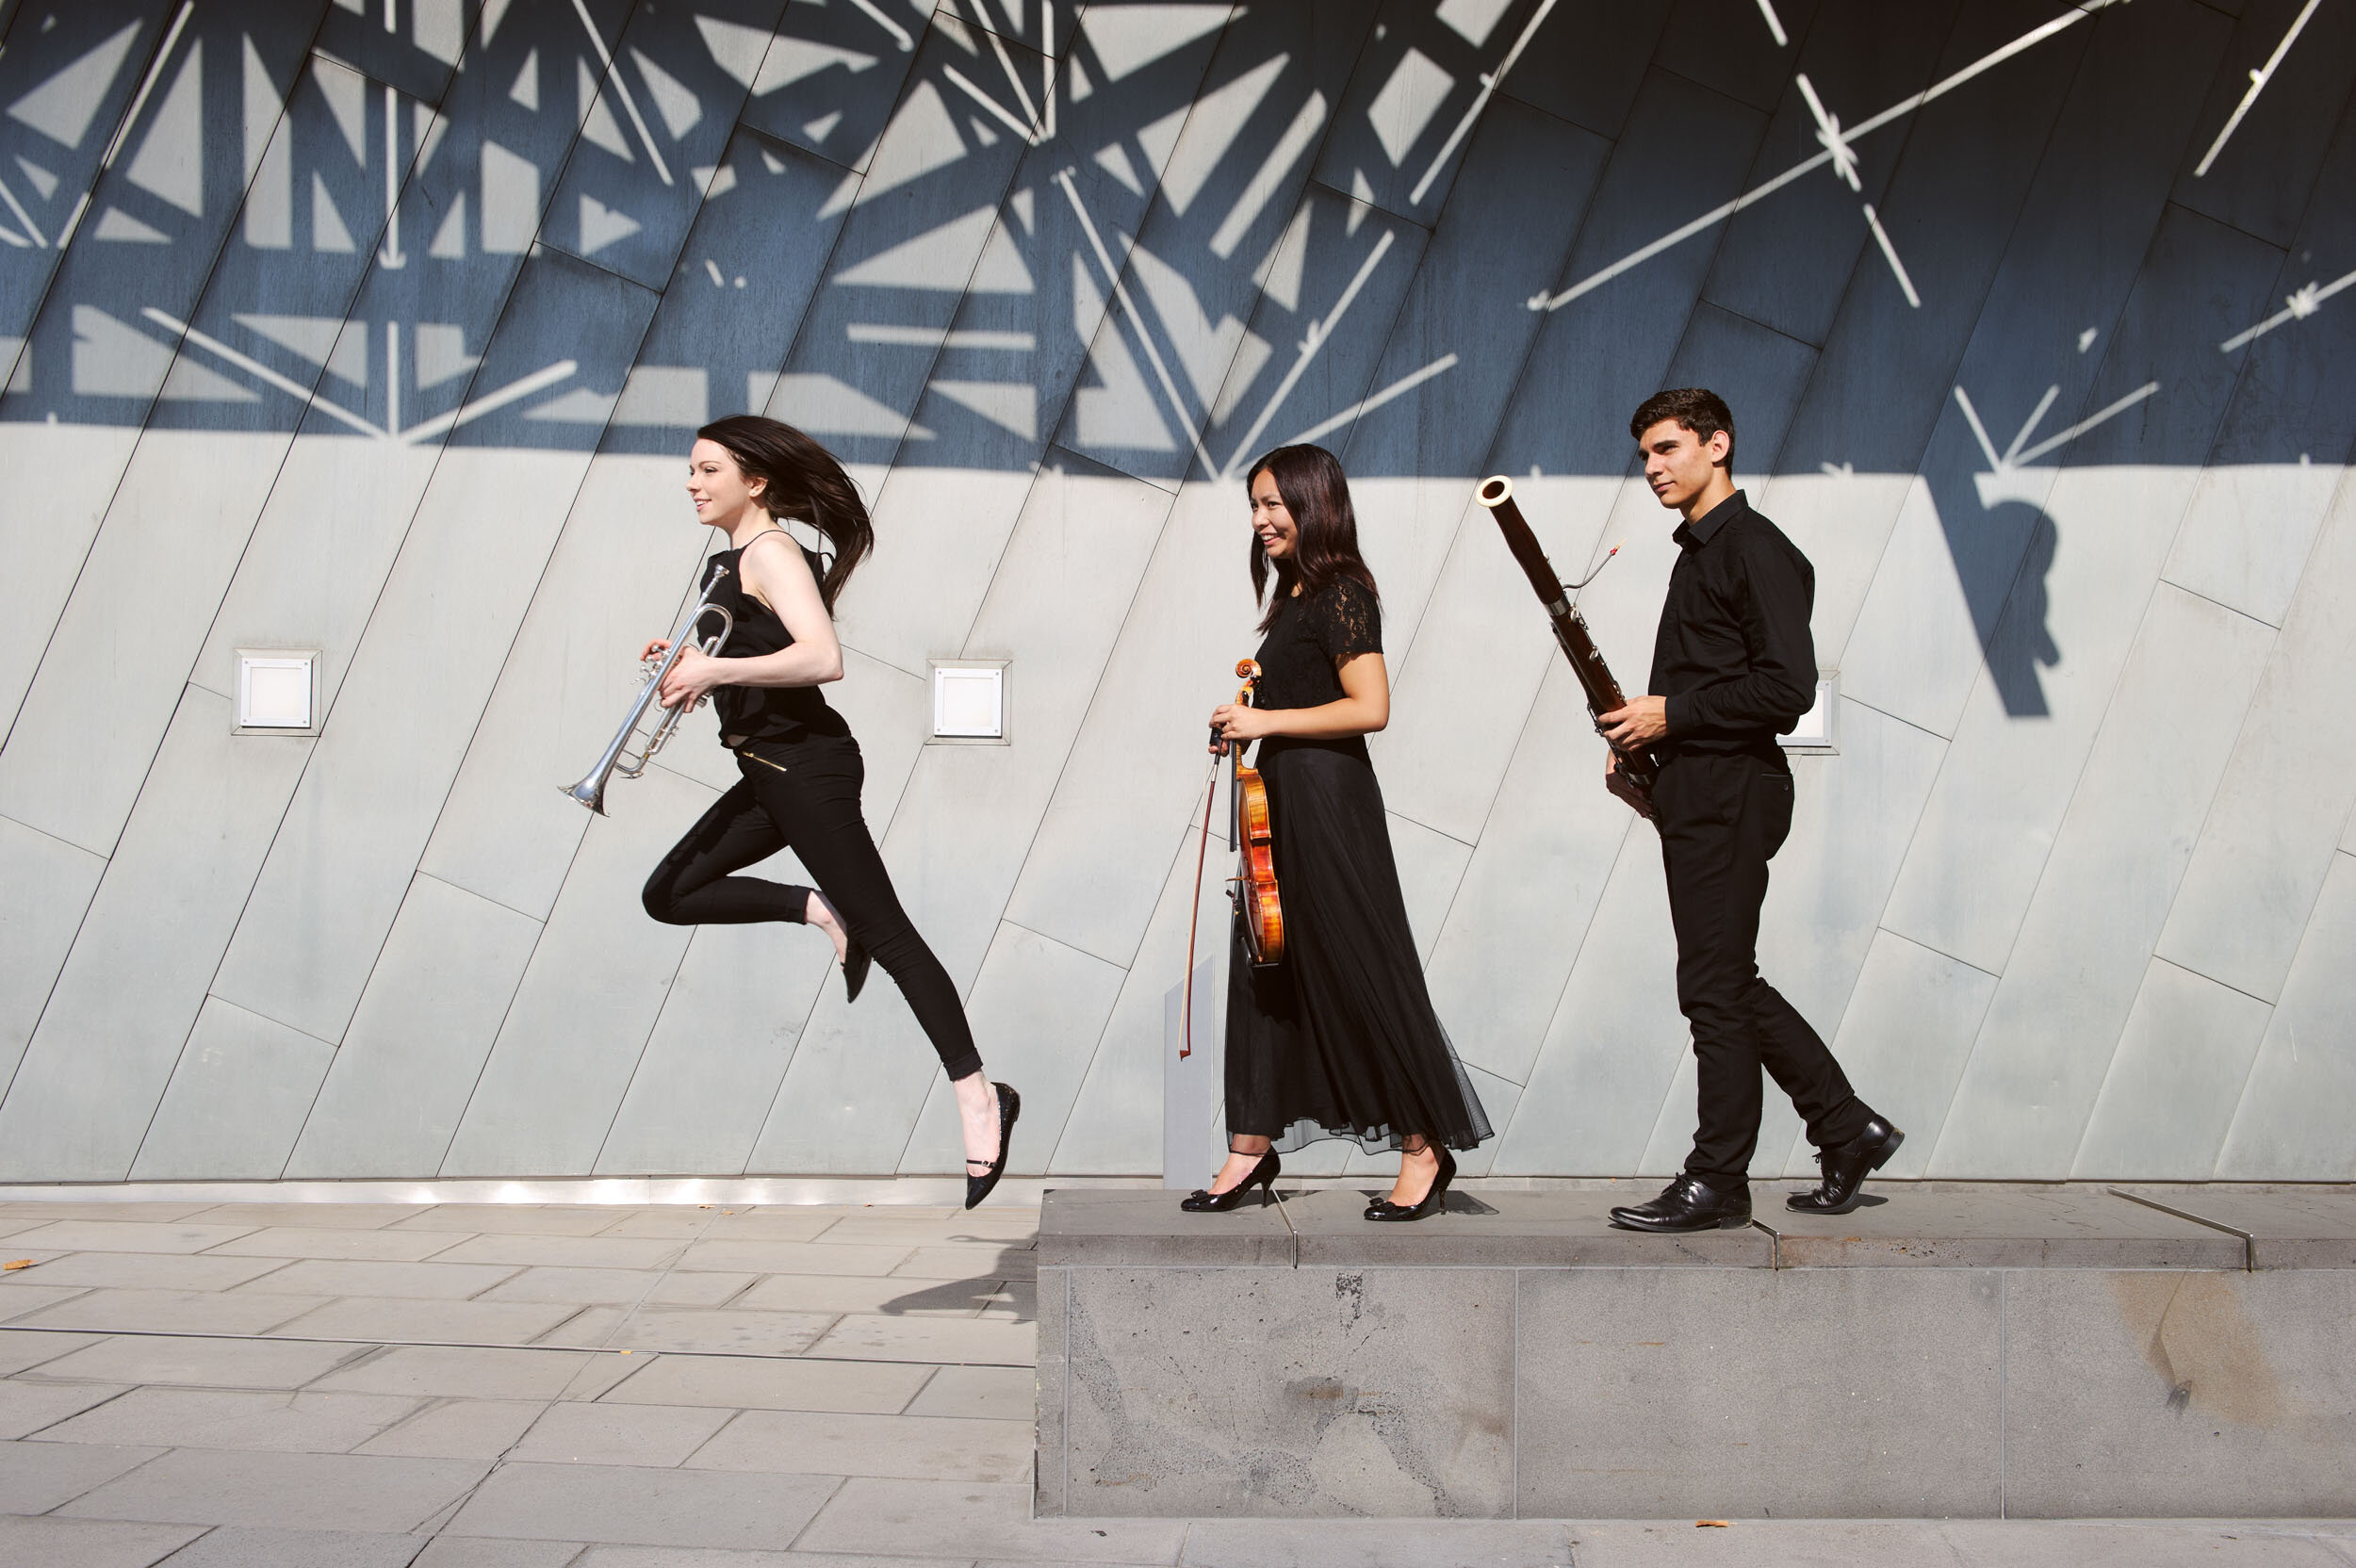  Promo images for Melbourne Youth Orchestra, 2015. 